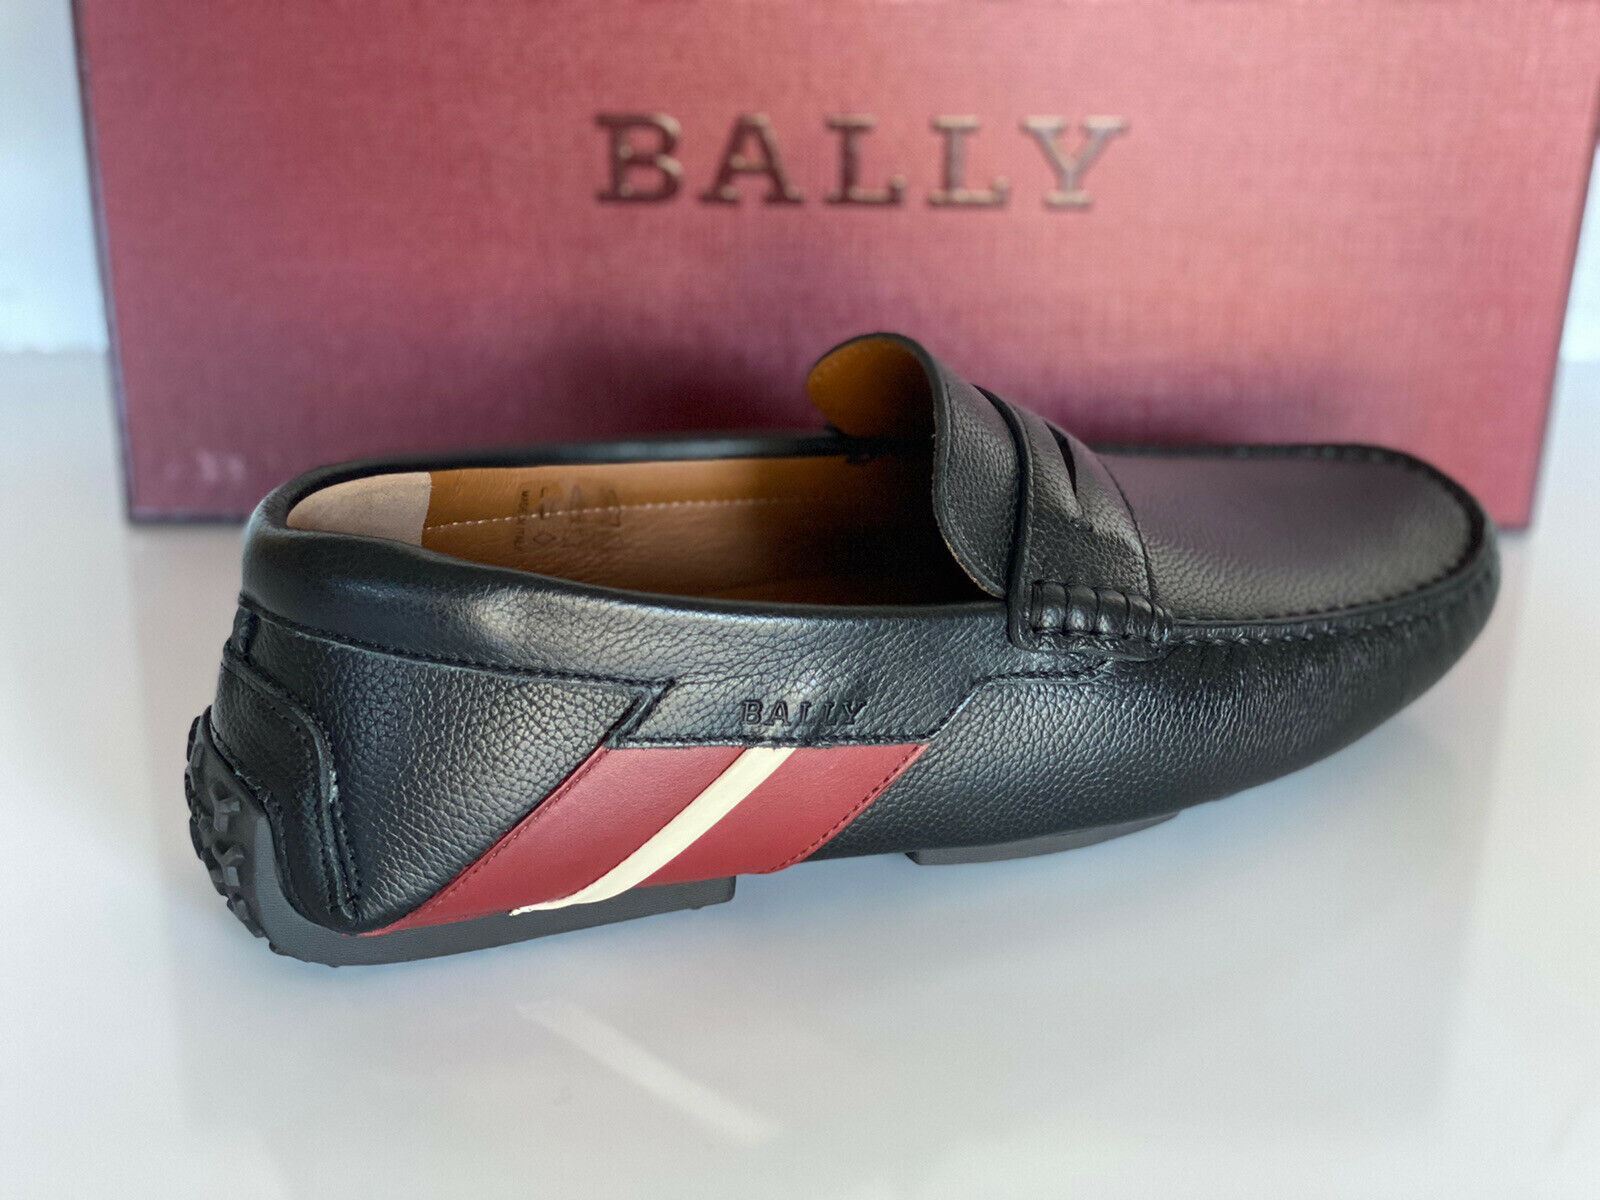 NIB Bally Mens Piotre Grained Leather Driver Loafers Shoes Black 8.5 US 6233869